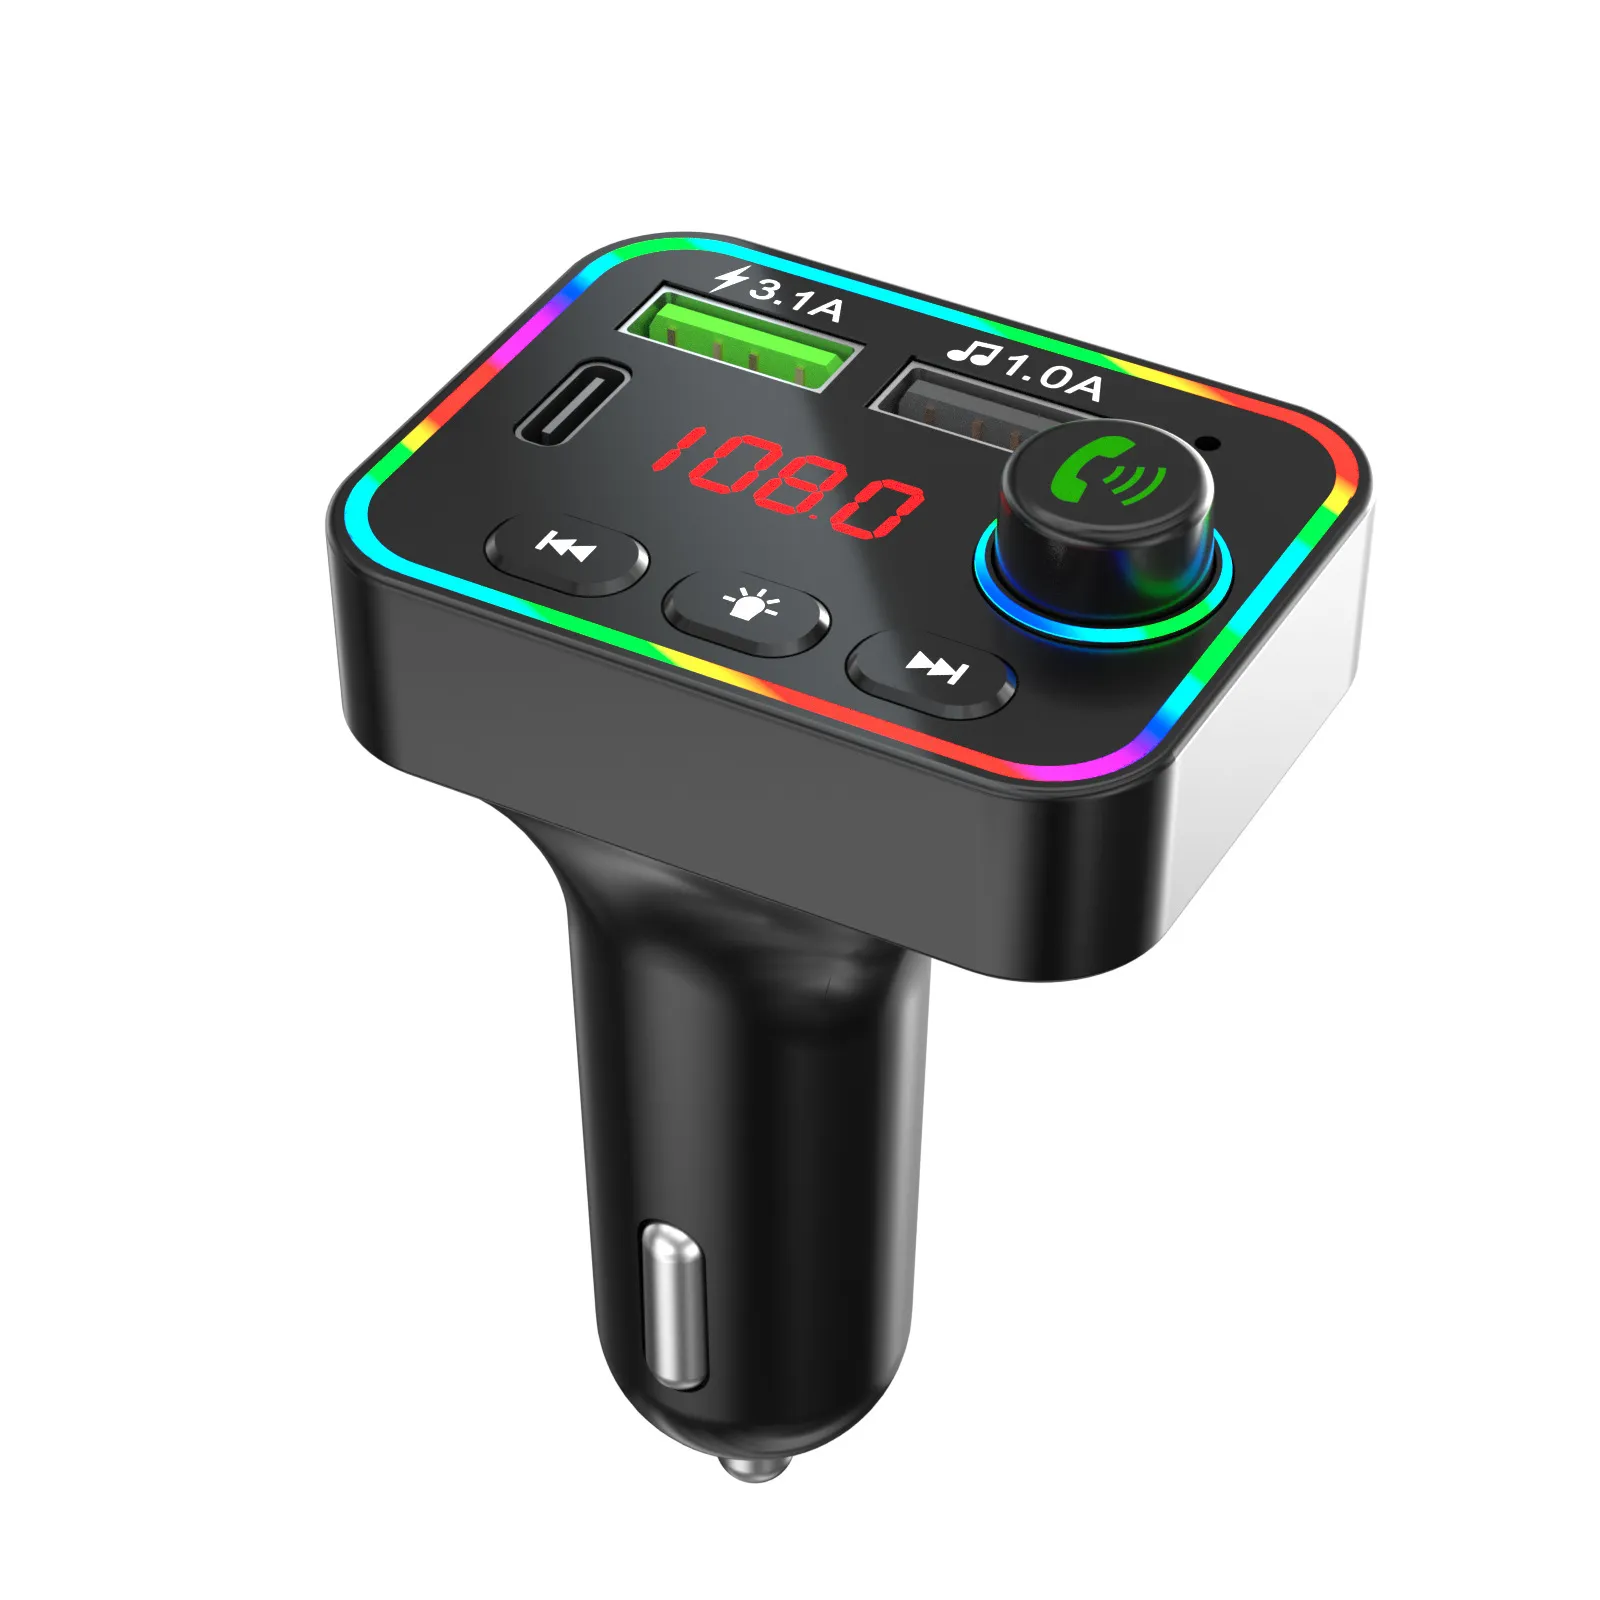 F4 Bluetooth Car Kit FM Transmitter MP3 Muisc Player Handsfree Wireless PD Quick Charger 3.1A Support TF Card USB BT LED Atmosphere Lamp